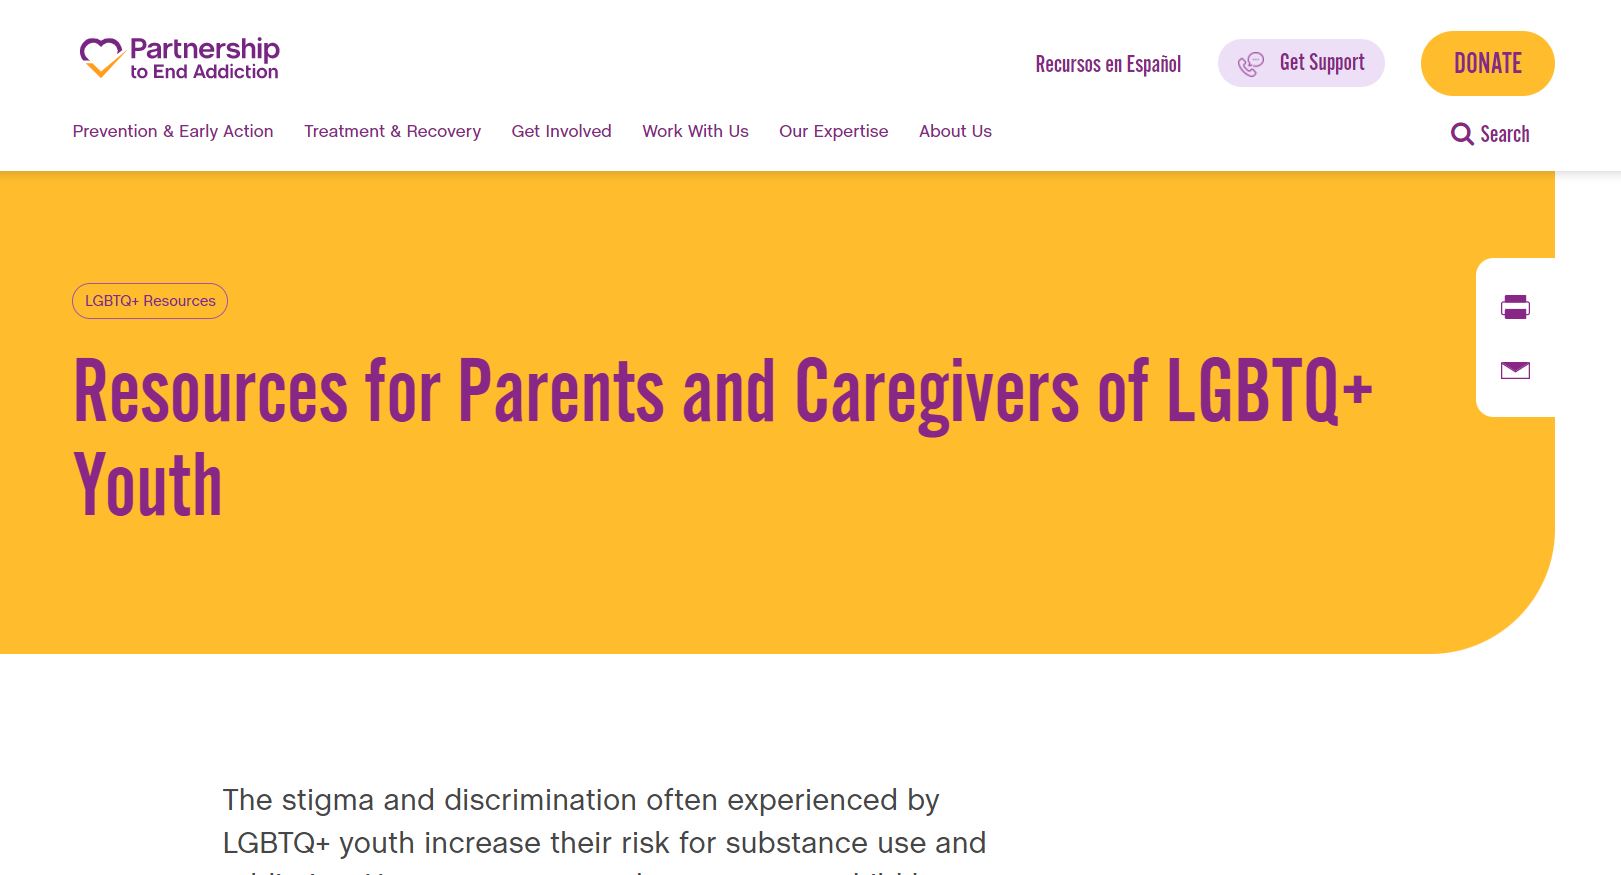 Partnership to End Addiction: Resources for Parents and Caregivers of LGBTQ+ Youth